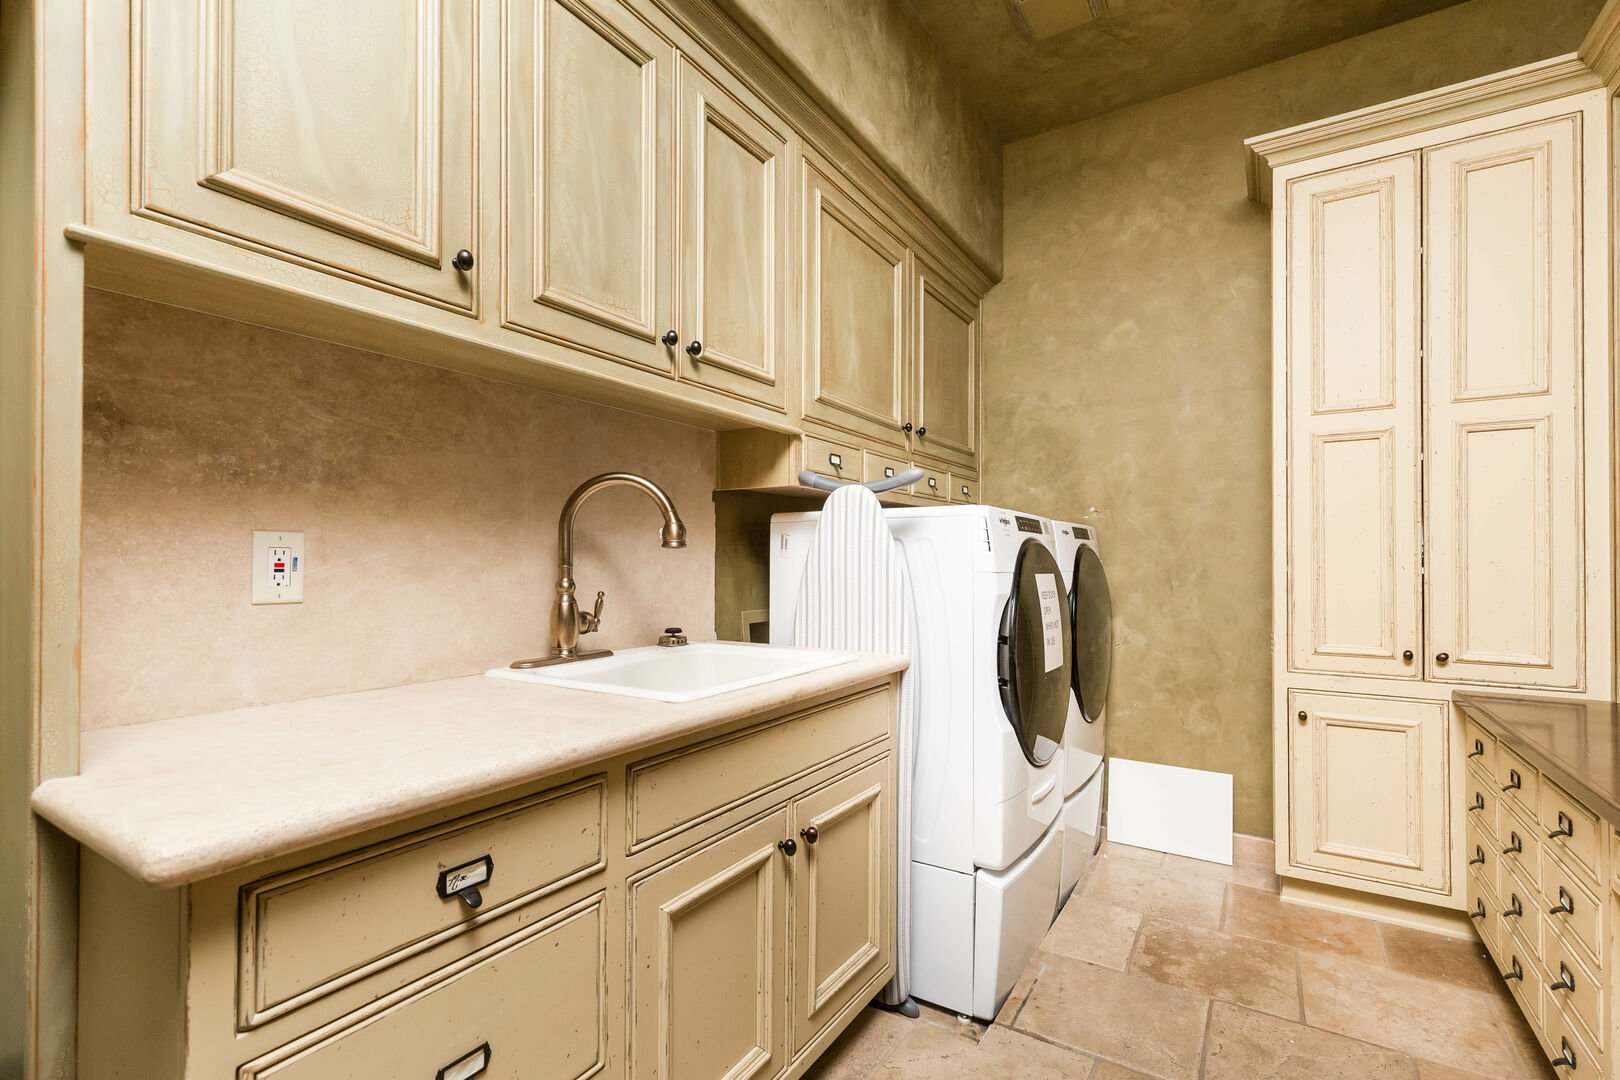 Laundry room with a washer and dryer available for use during your stay.